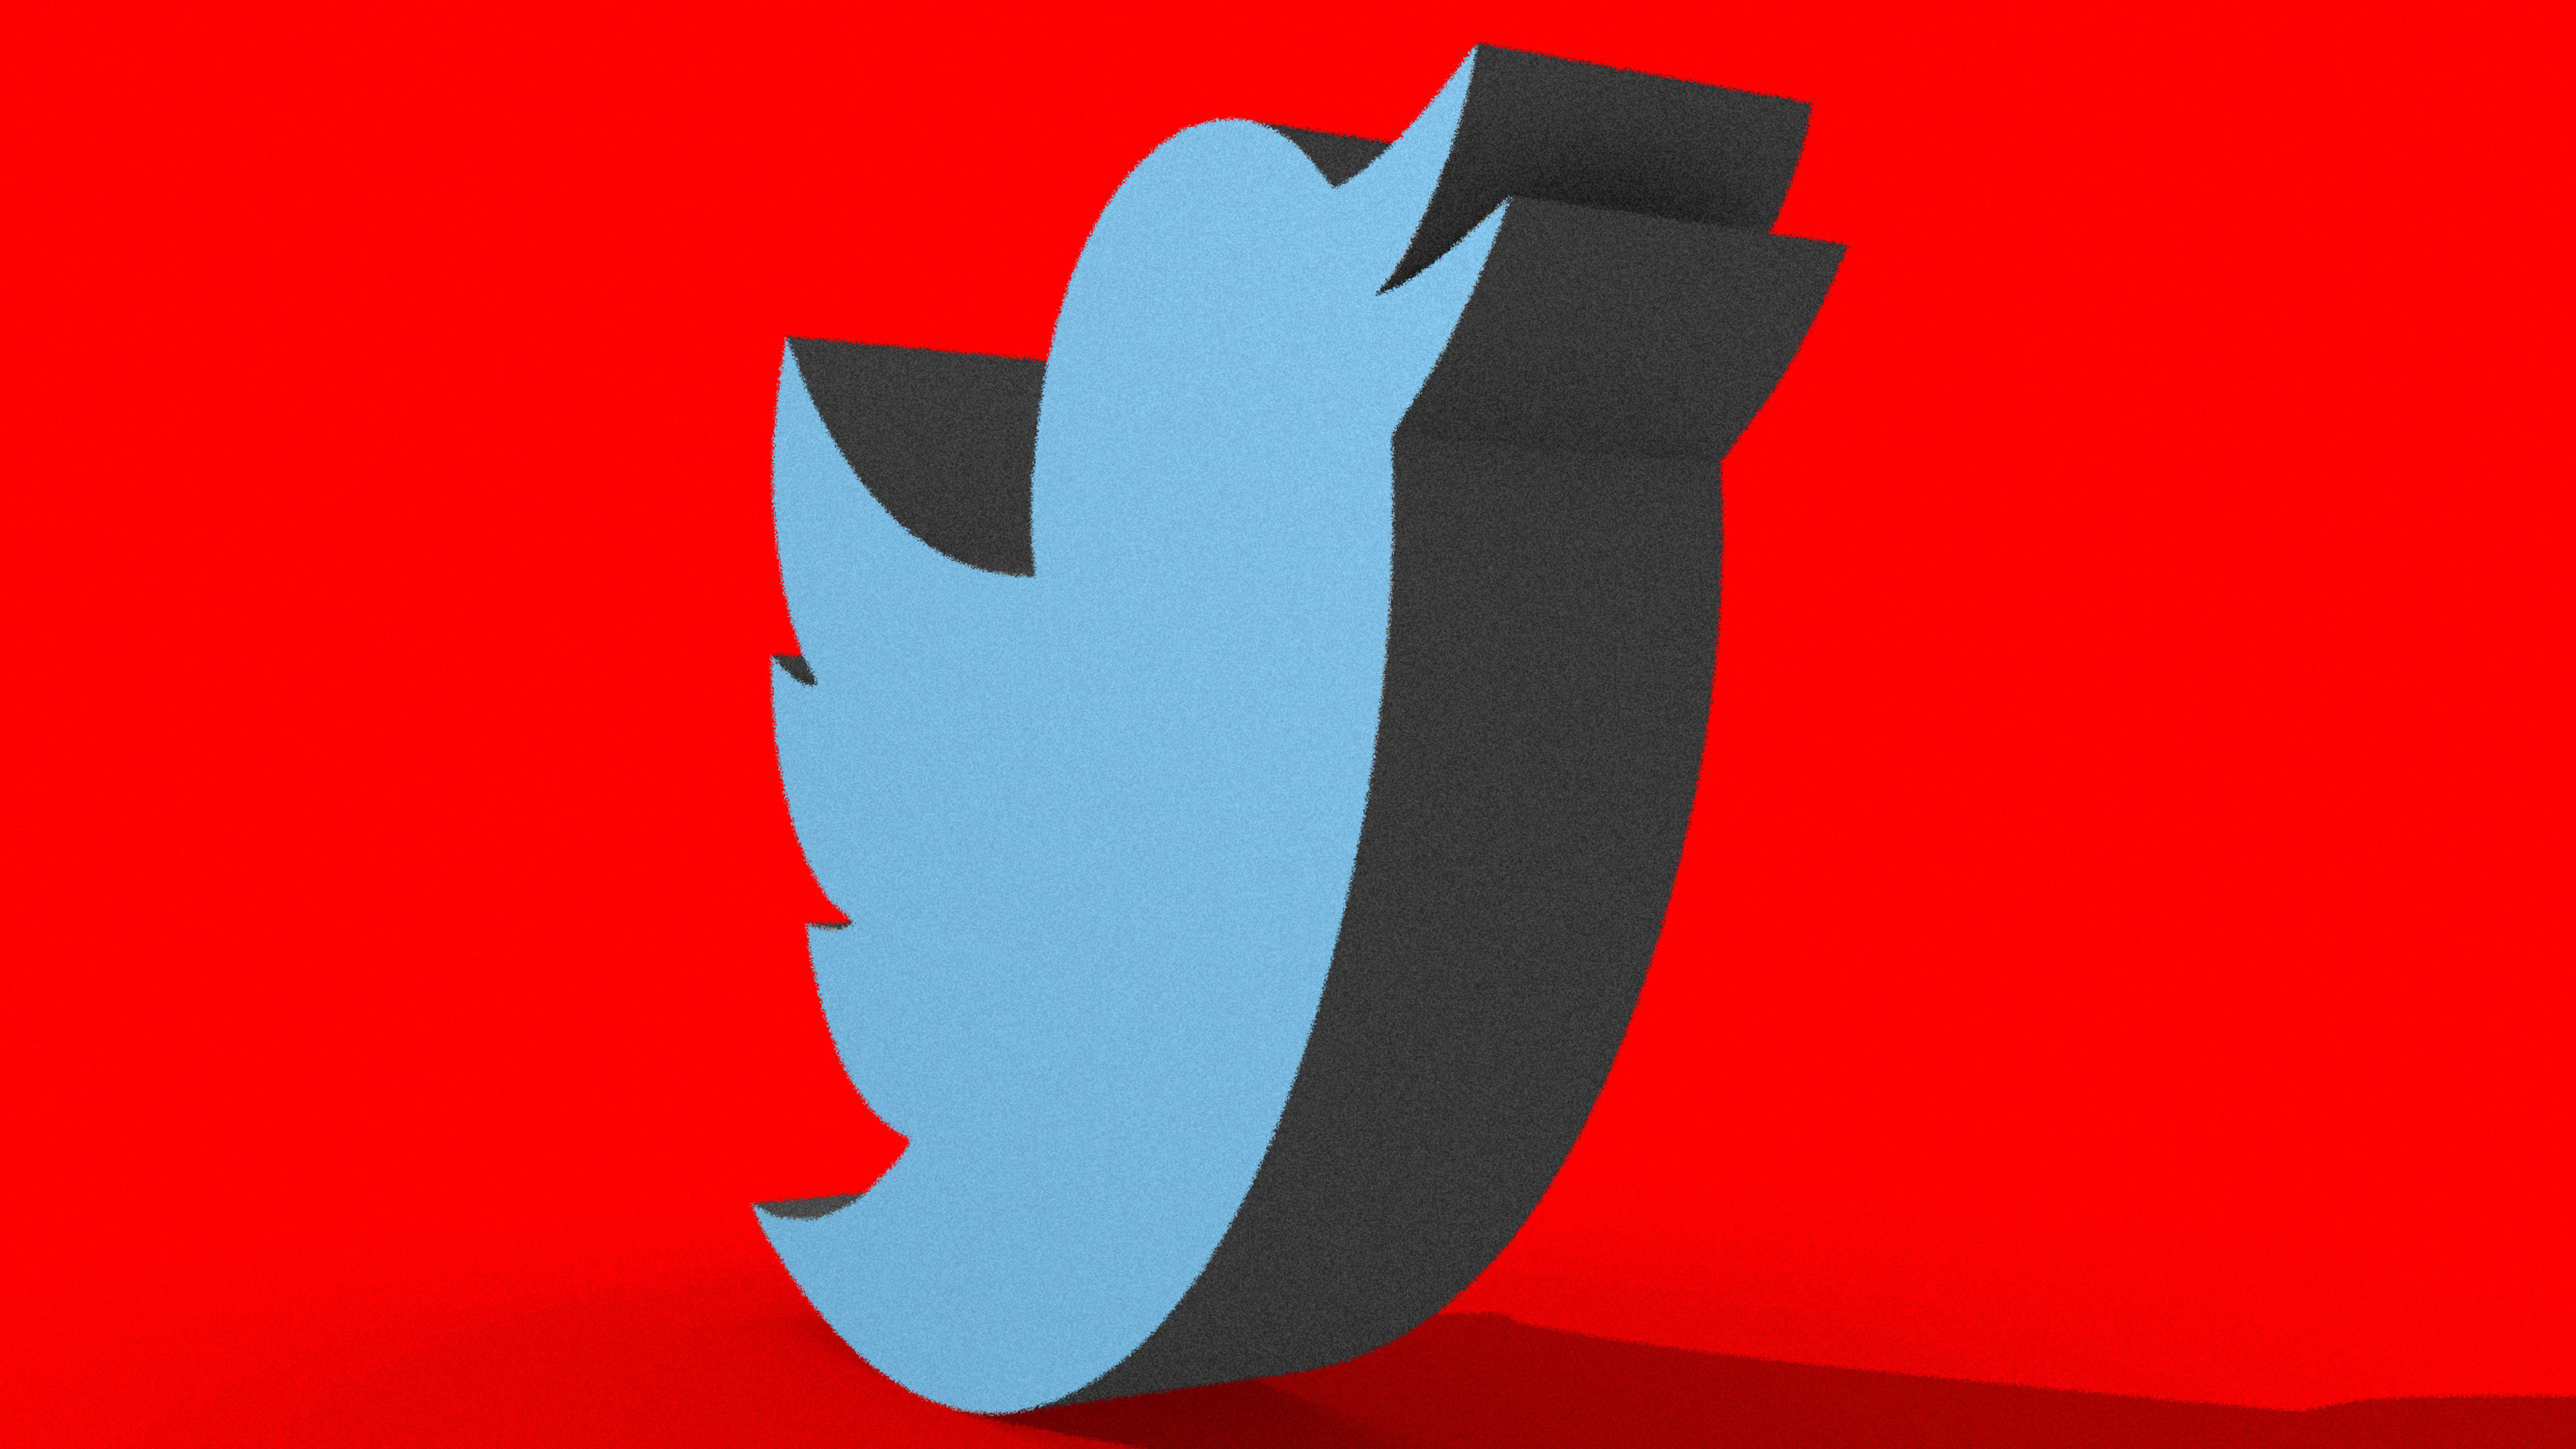 Twitter bans advertising from state-run media after disinformation about Hong Kong